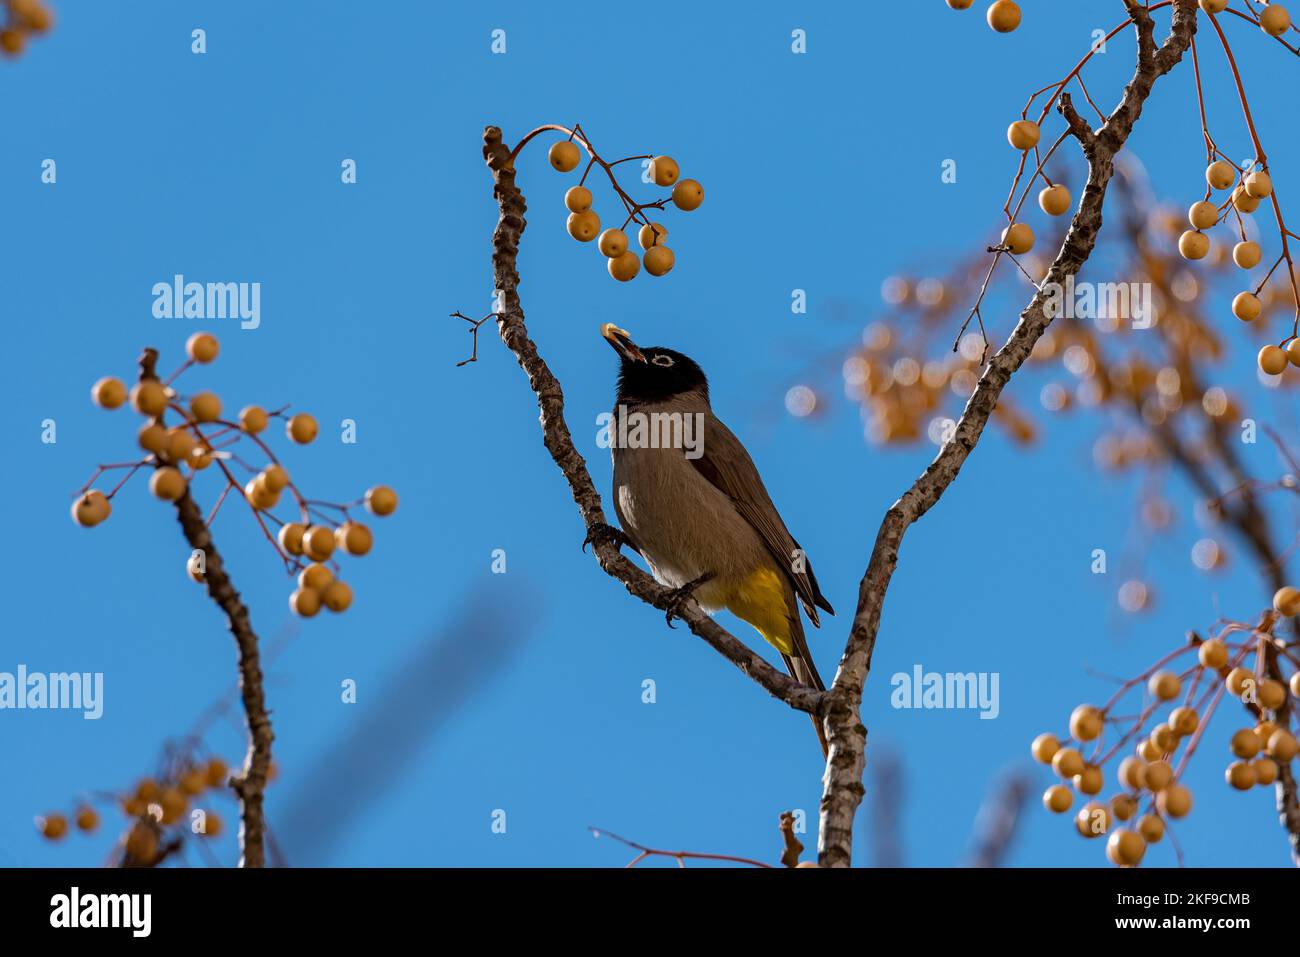 This dark-capped bulbul is easily identified by its bright yellow rump. Israel, Jerusalem. Stock Photo